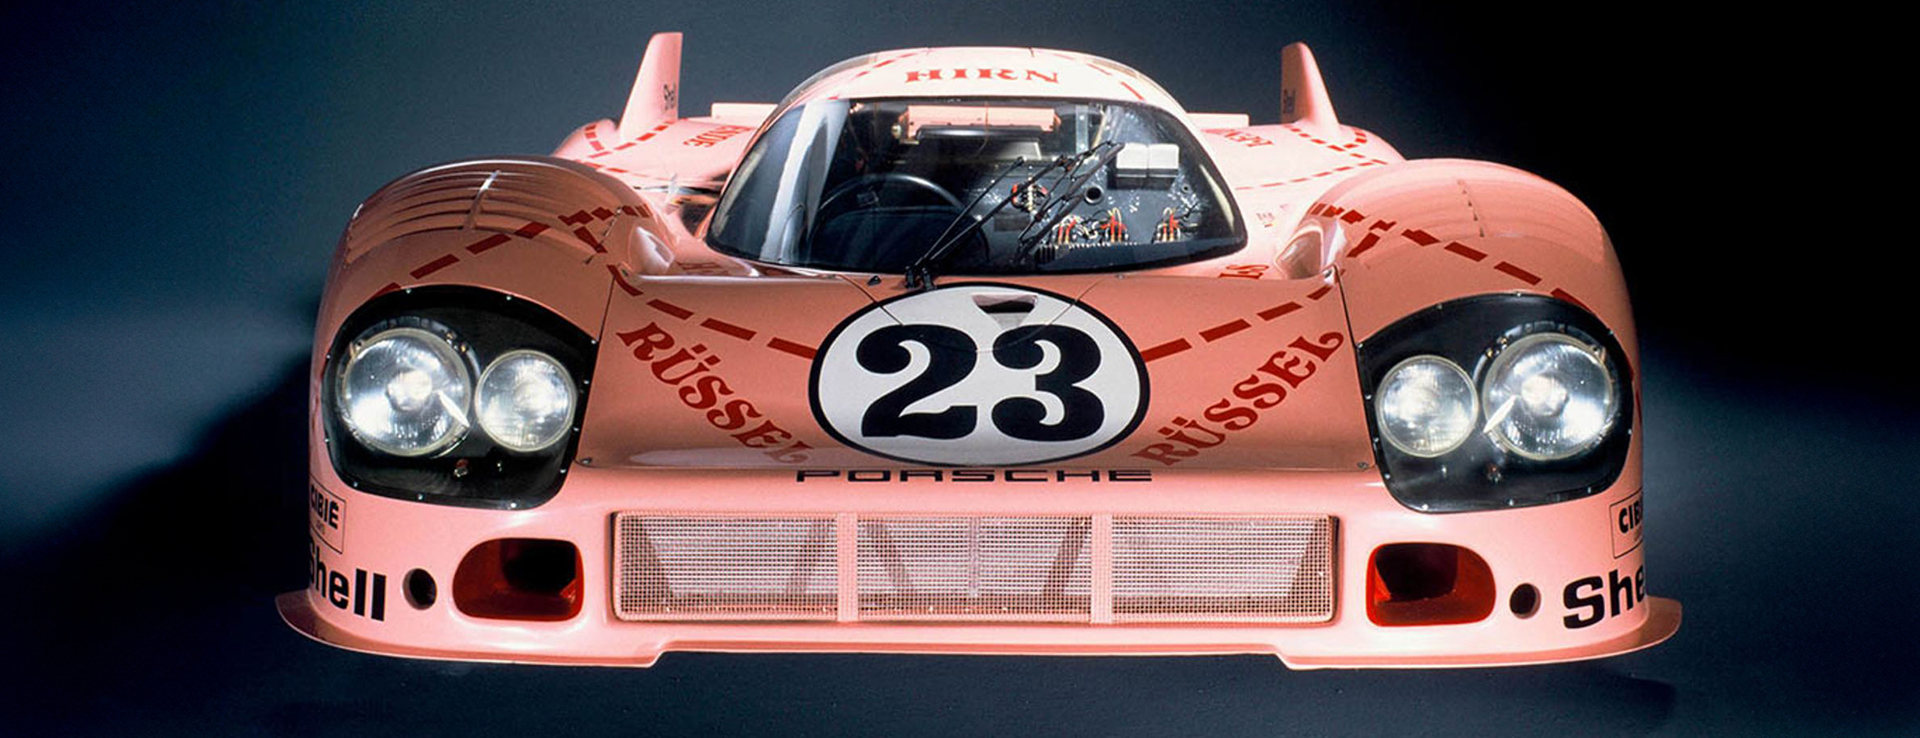 Porsche 917/20 in Pink Pig livery at Le Mans